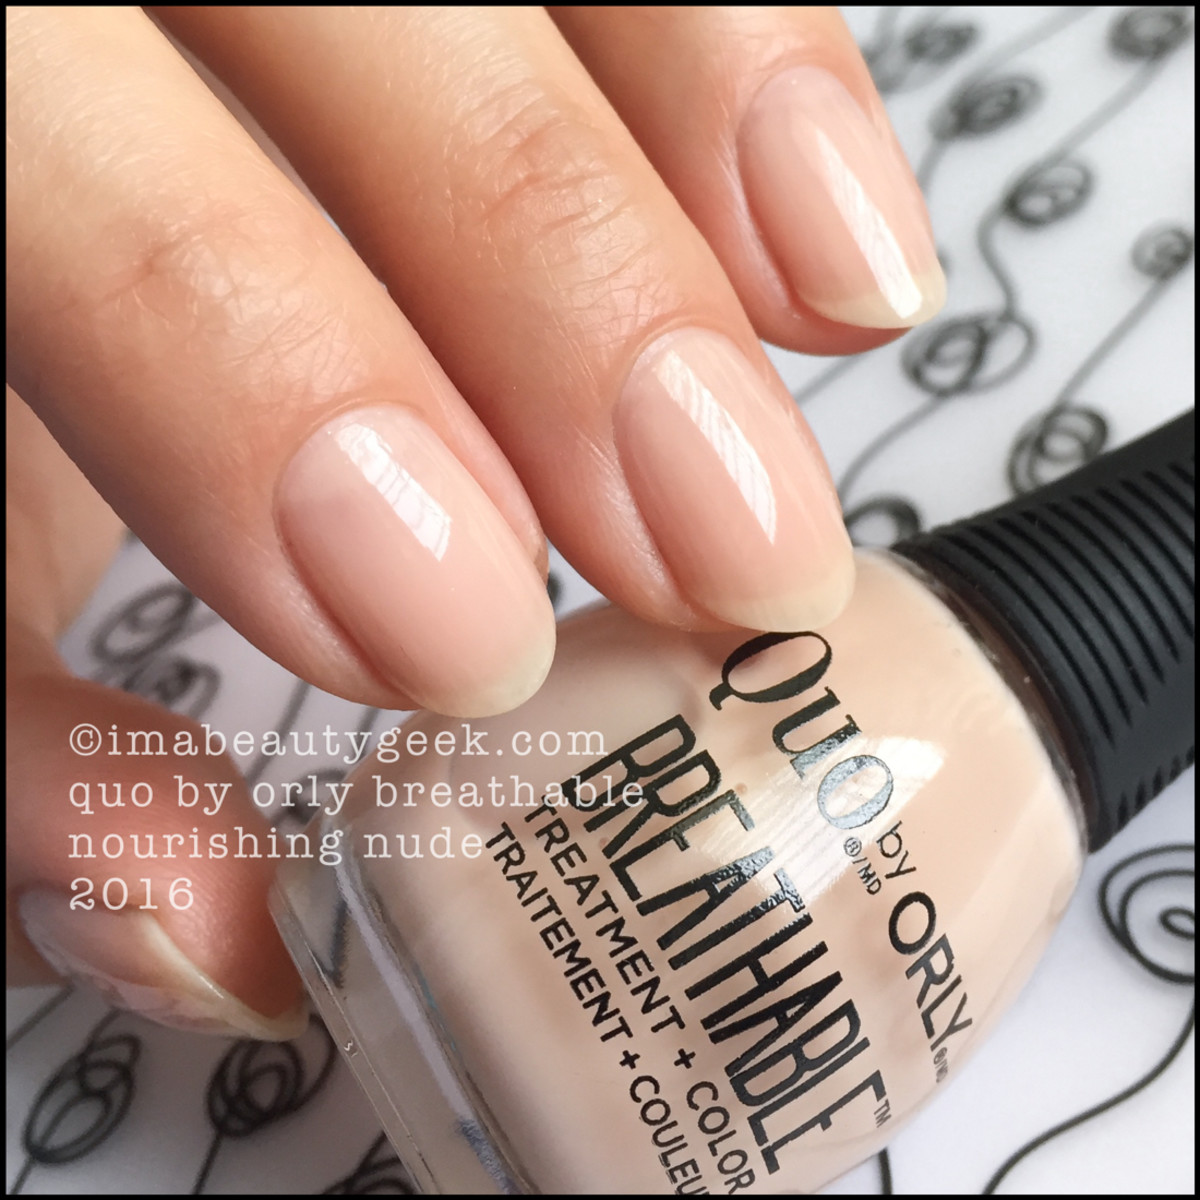 Orly Breathable Nail Polish_Quo by Orly Breathable Nourishing Nude 2016